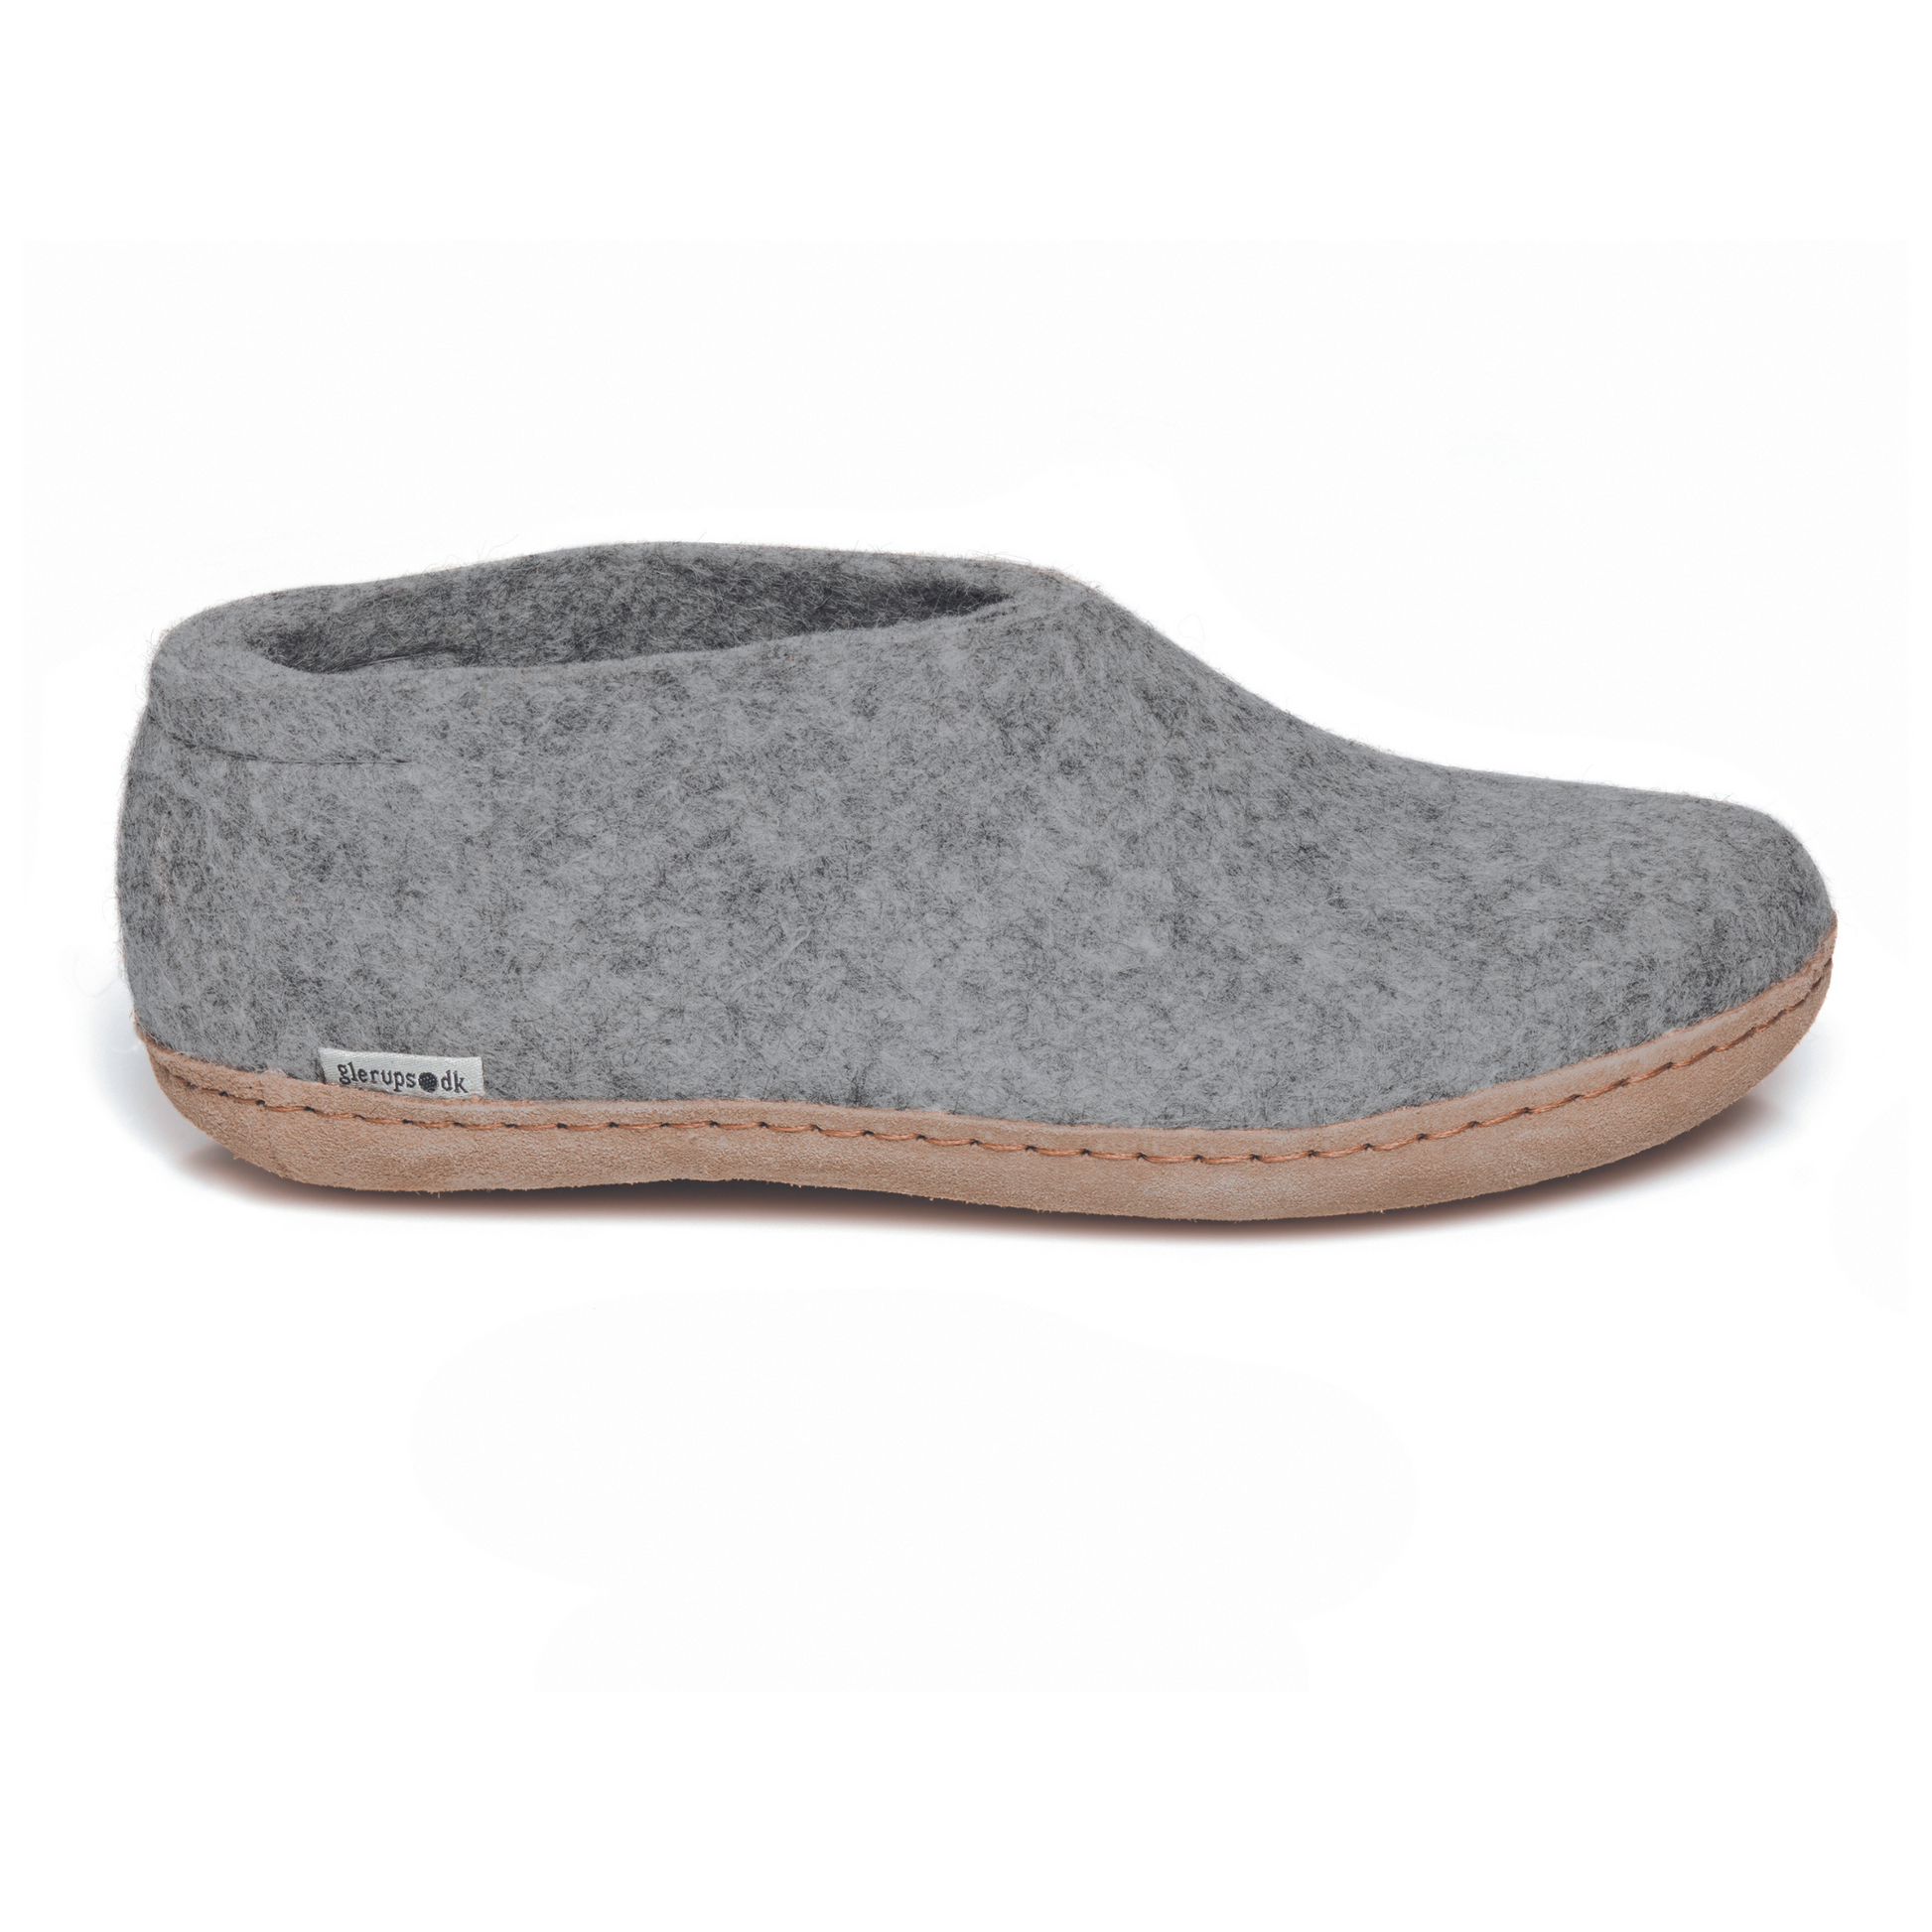 A light grey slipper is pictured in profile, showing the high back of the heel. The bottom lined in tan leather has a small tag with the brand name attached in the seam where the leather meets the felted wool.